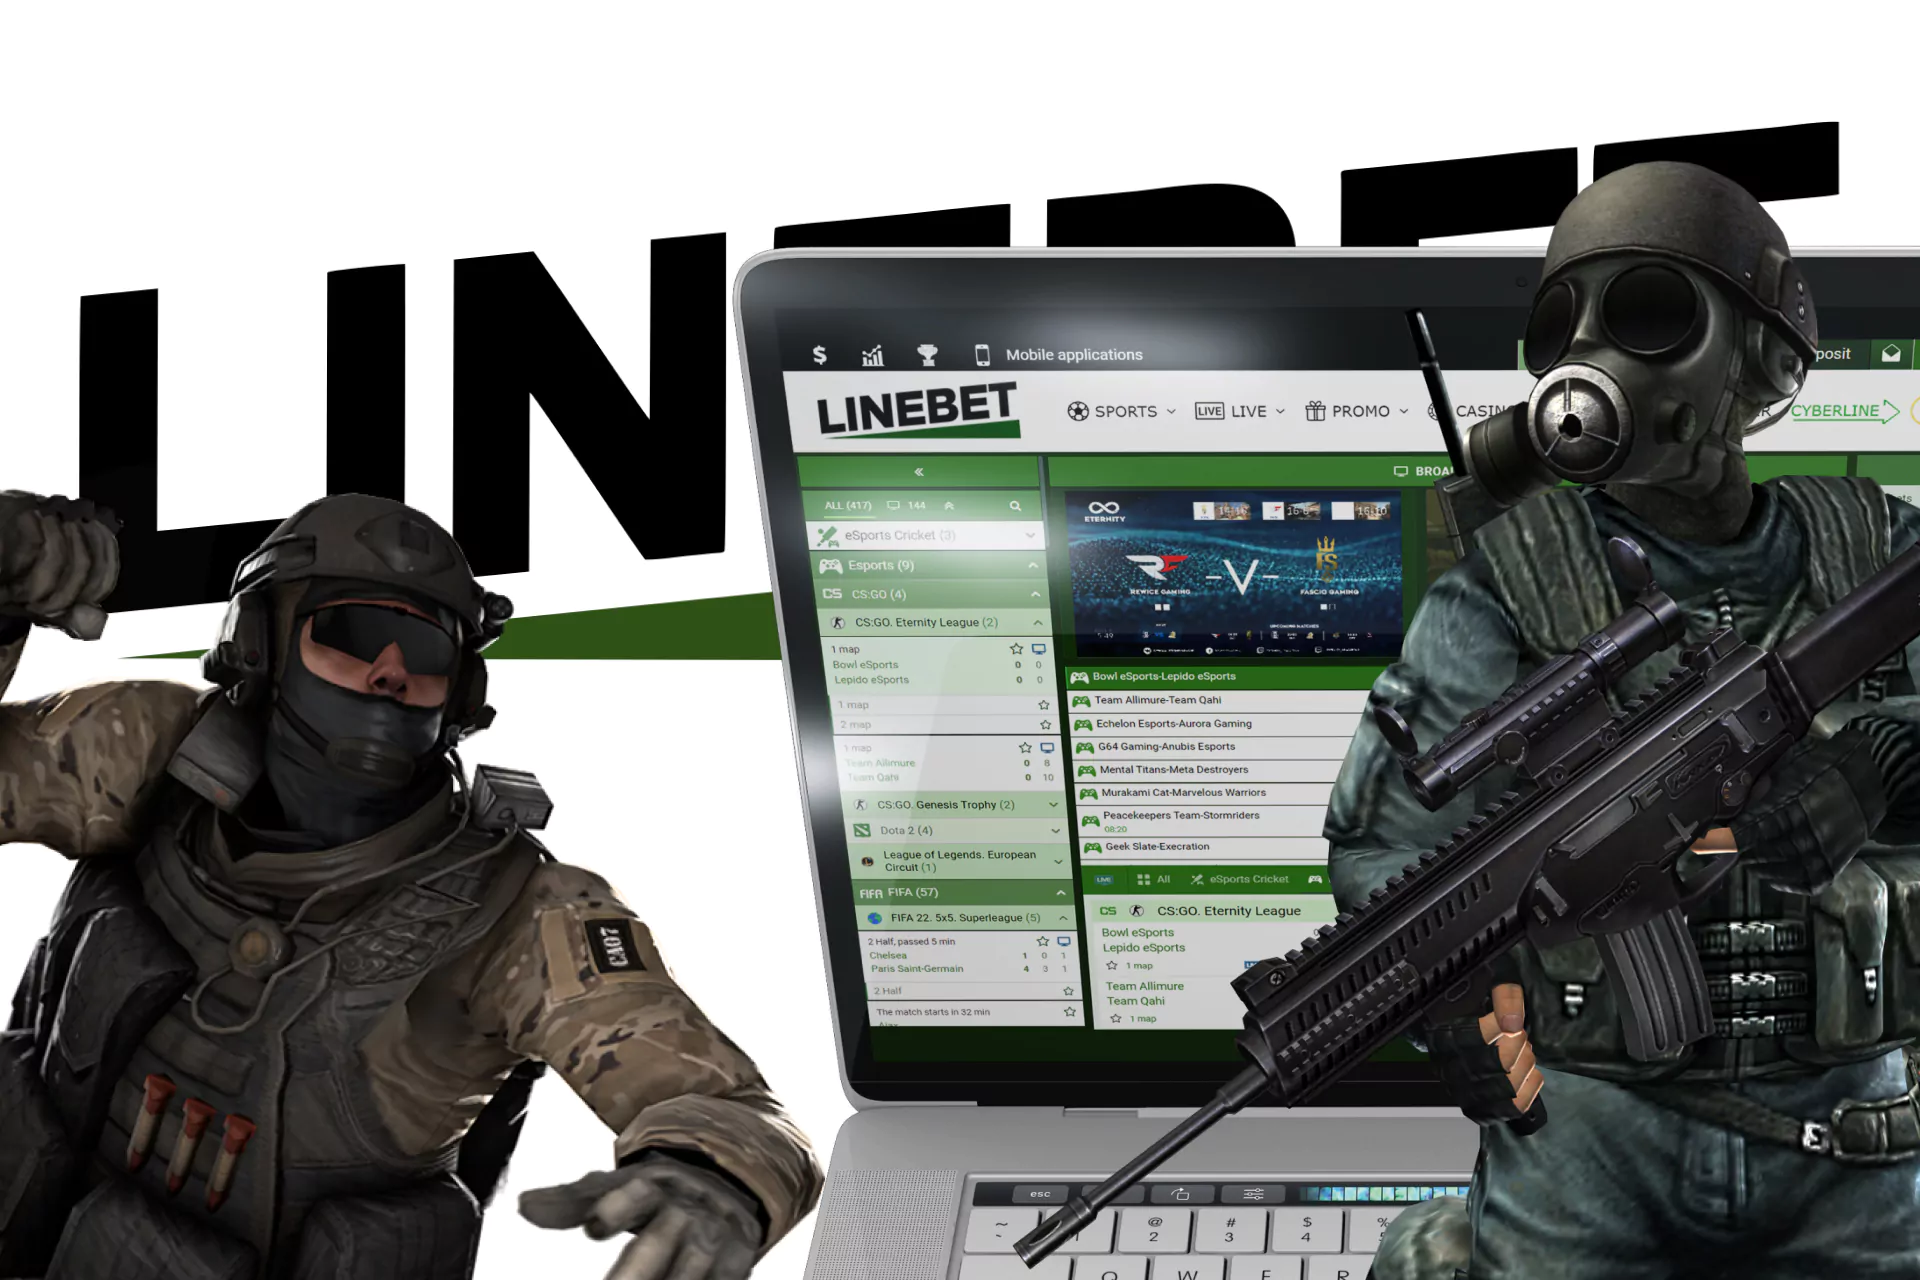 Follow the instructions to start betting on CS:GO at Linebet.